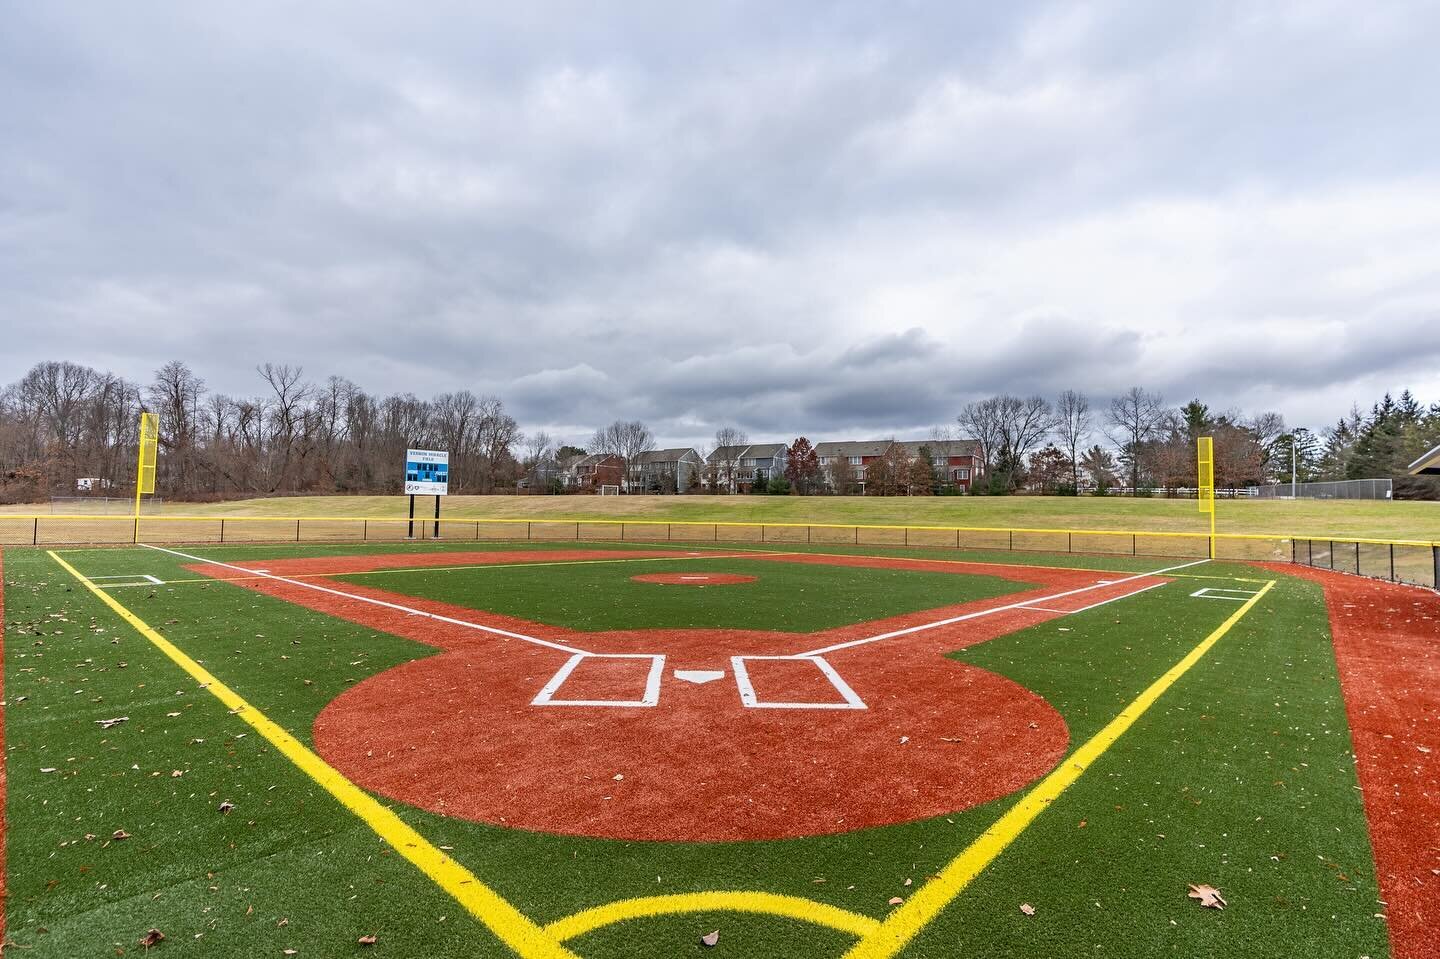 An amazing photo of our field from the perspective of home plate ⚾️